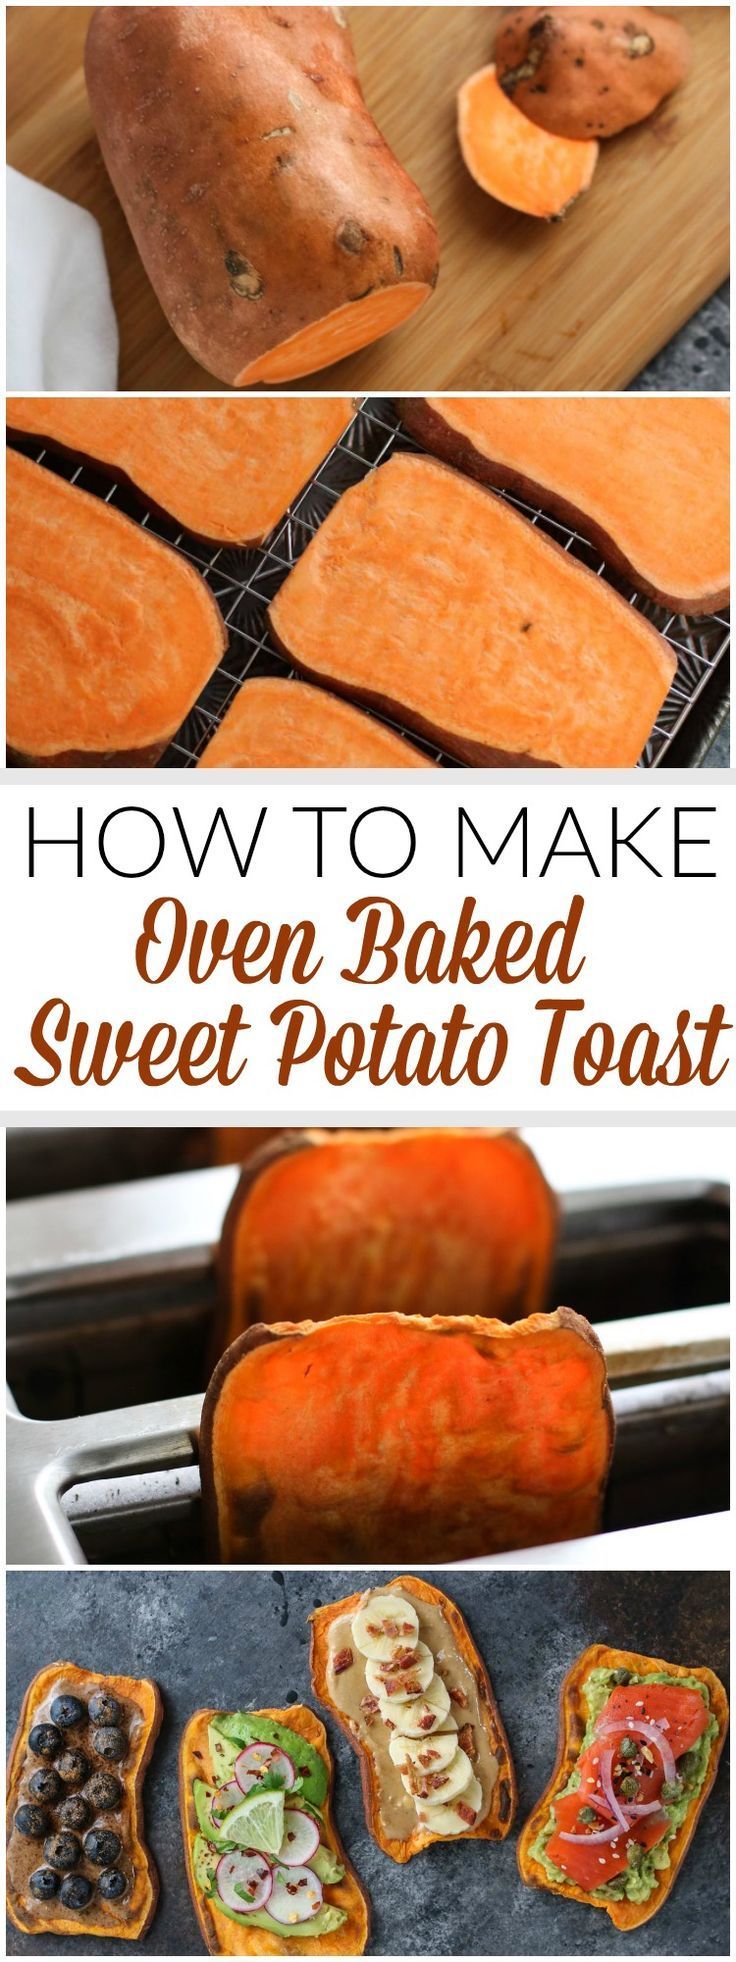 A step-by-step photo tutorial showing how to make oven baked Sweet Potato Toast. A big-batch method for sweet potato toast that’s